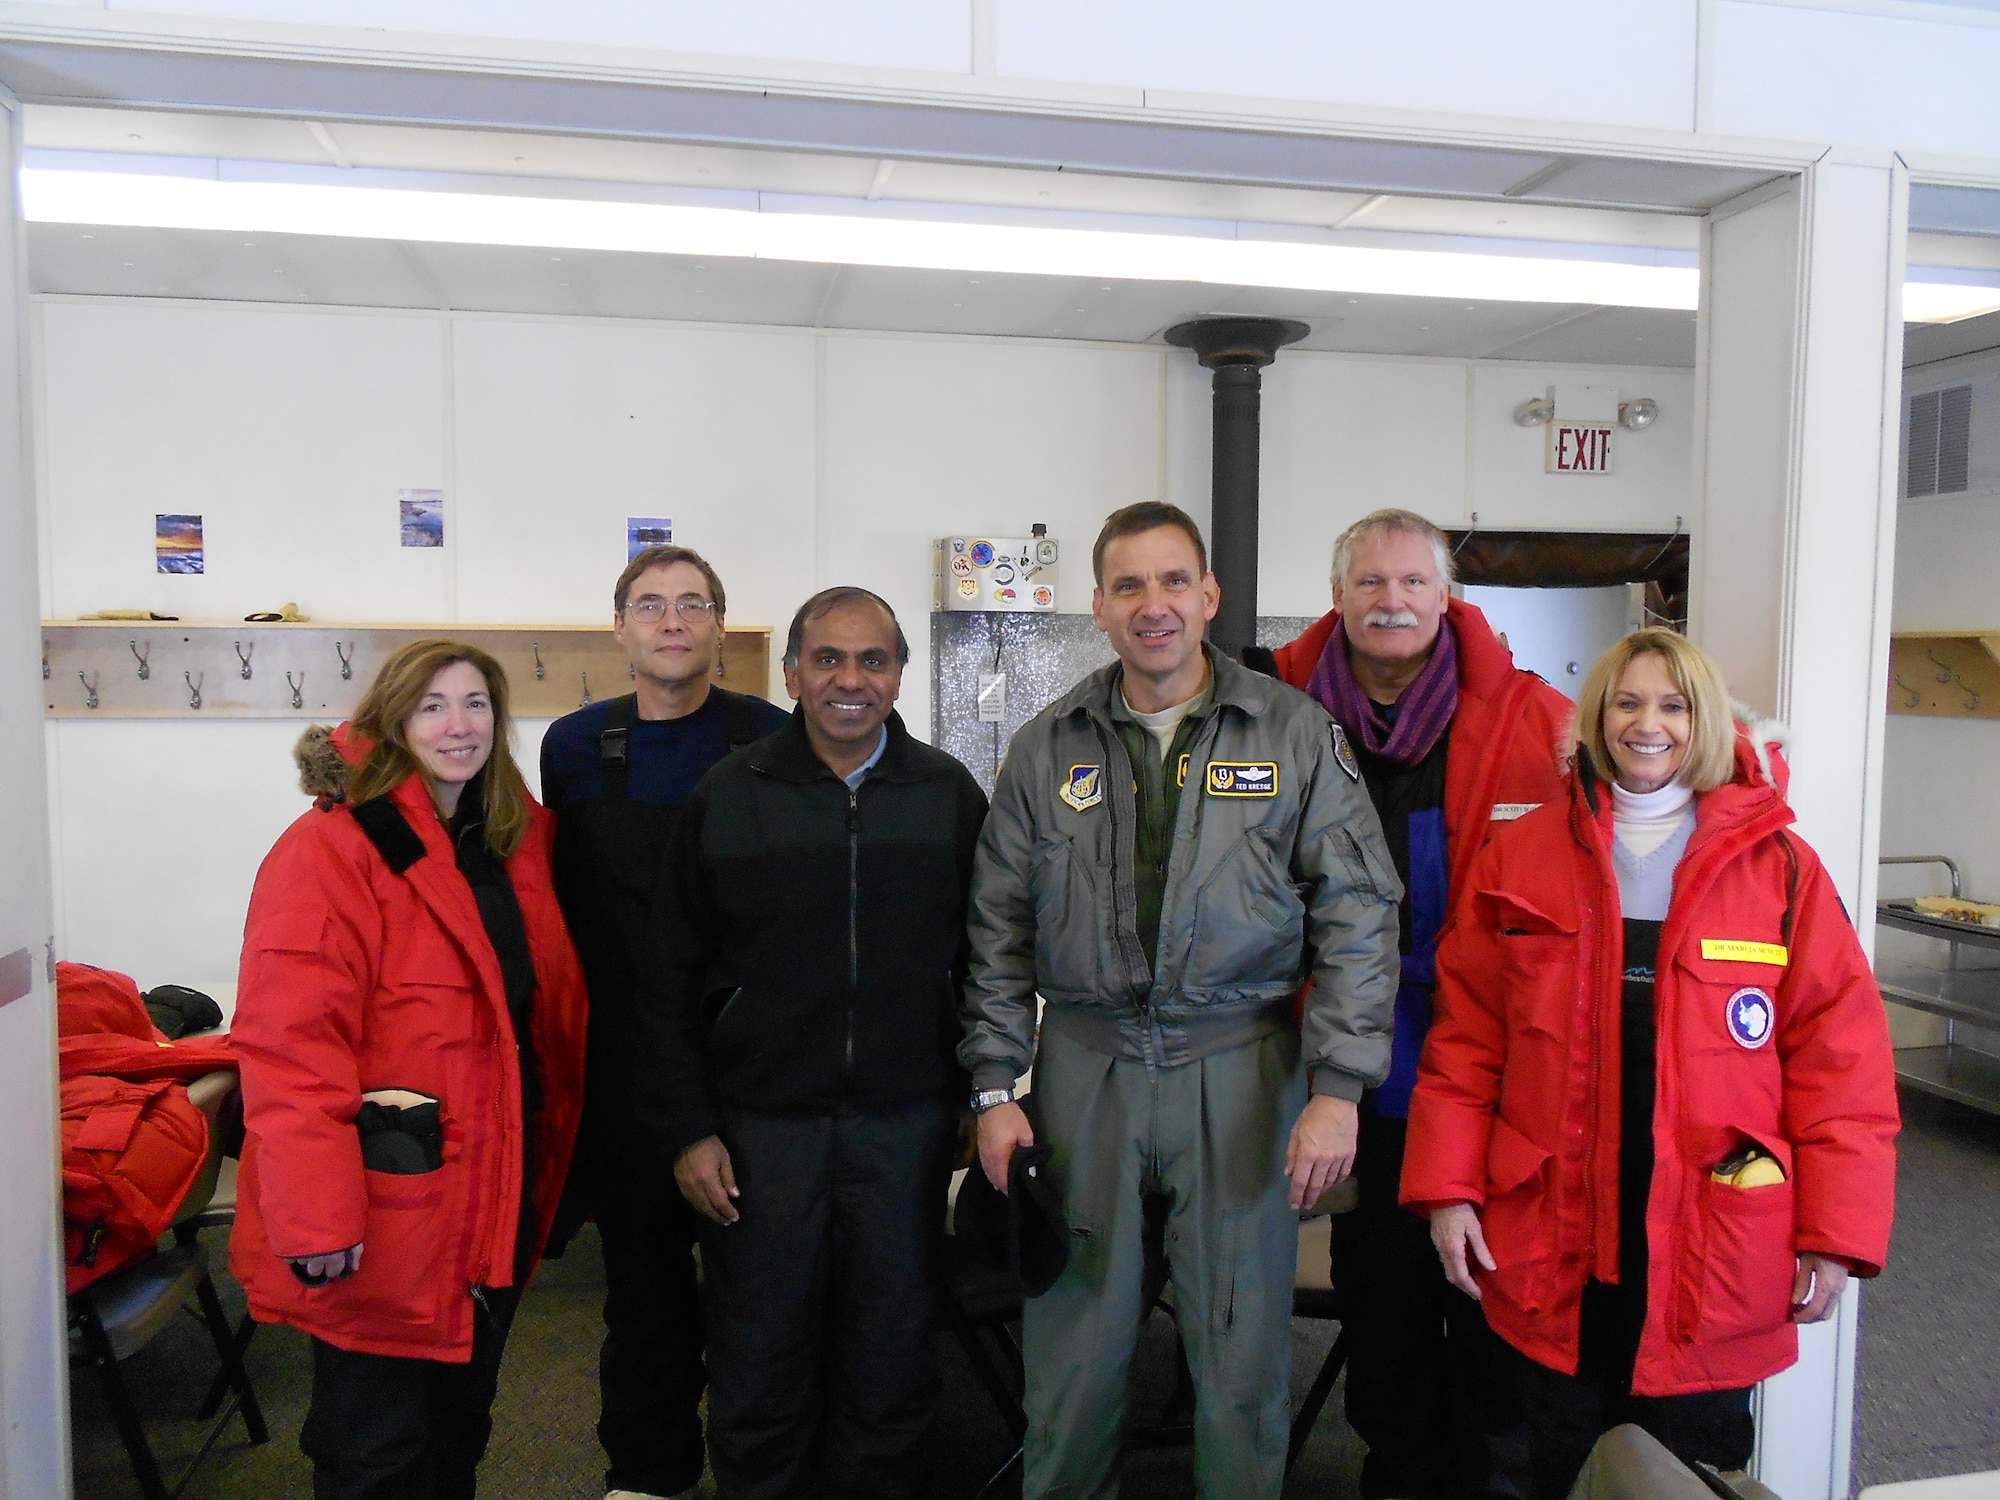 McMURDO STATION, Antarctica--Lt Gen Ted Kresge, Commander, Joint Task Force-Support Forces Antarctica (JTF-SFA), stands with Dr Subra Suresh, Director, National Science Foundation, third from left, and other senior officials during an unexpected meeting at McMurdo Station on November 20. JTF-SFA, through Operation Deep Freeze, provides support to the NSF, which manages the United States Antarctic Program.